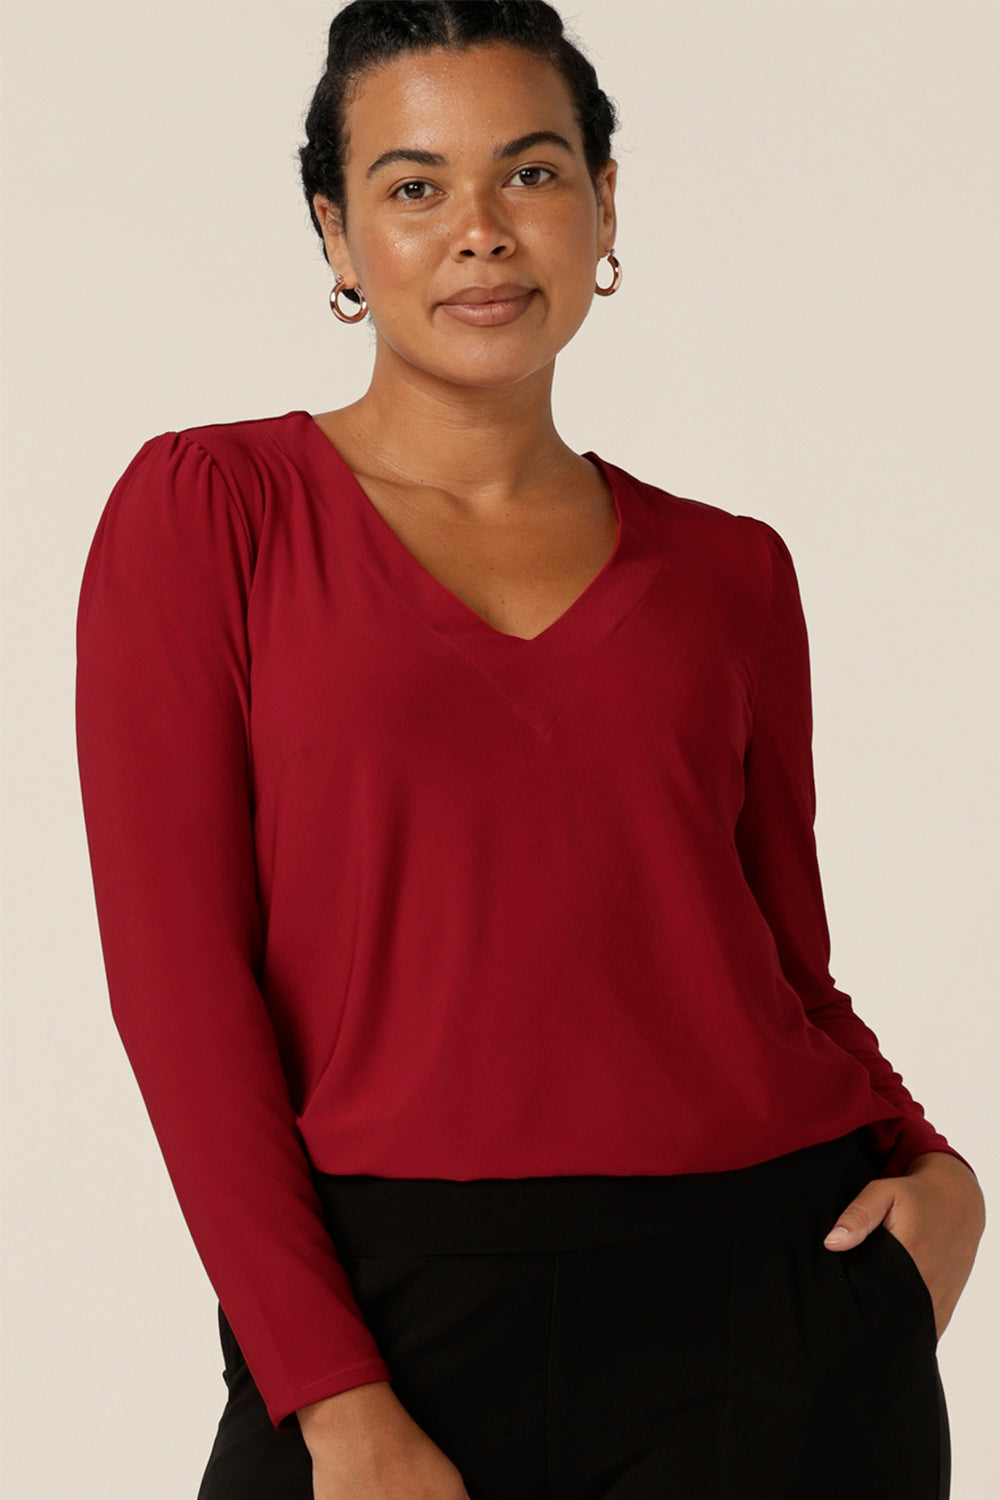 A size 12, curvy woman wears a V neck jersey top in flame red jersey. With long sleeves, this top is a good autumn/winter top, perfect for winter layering and styling under workwear jackets.